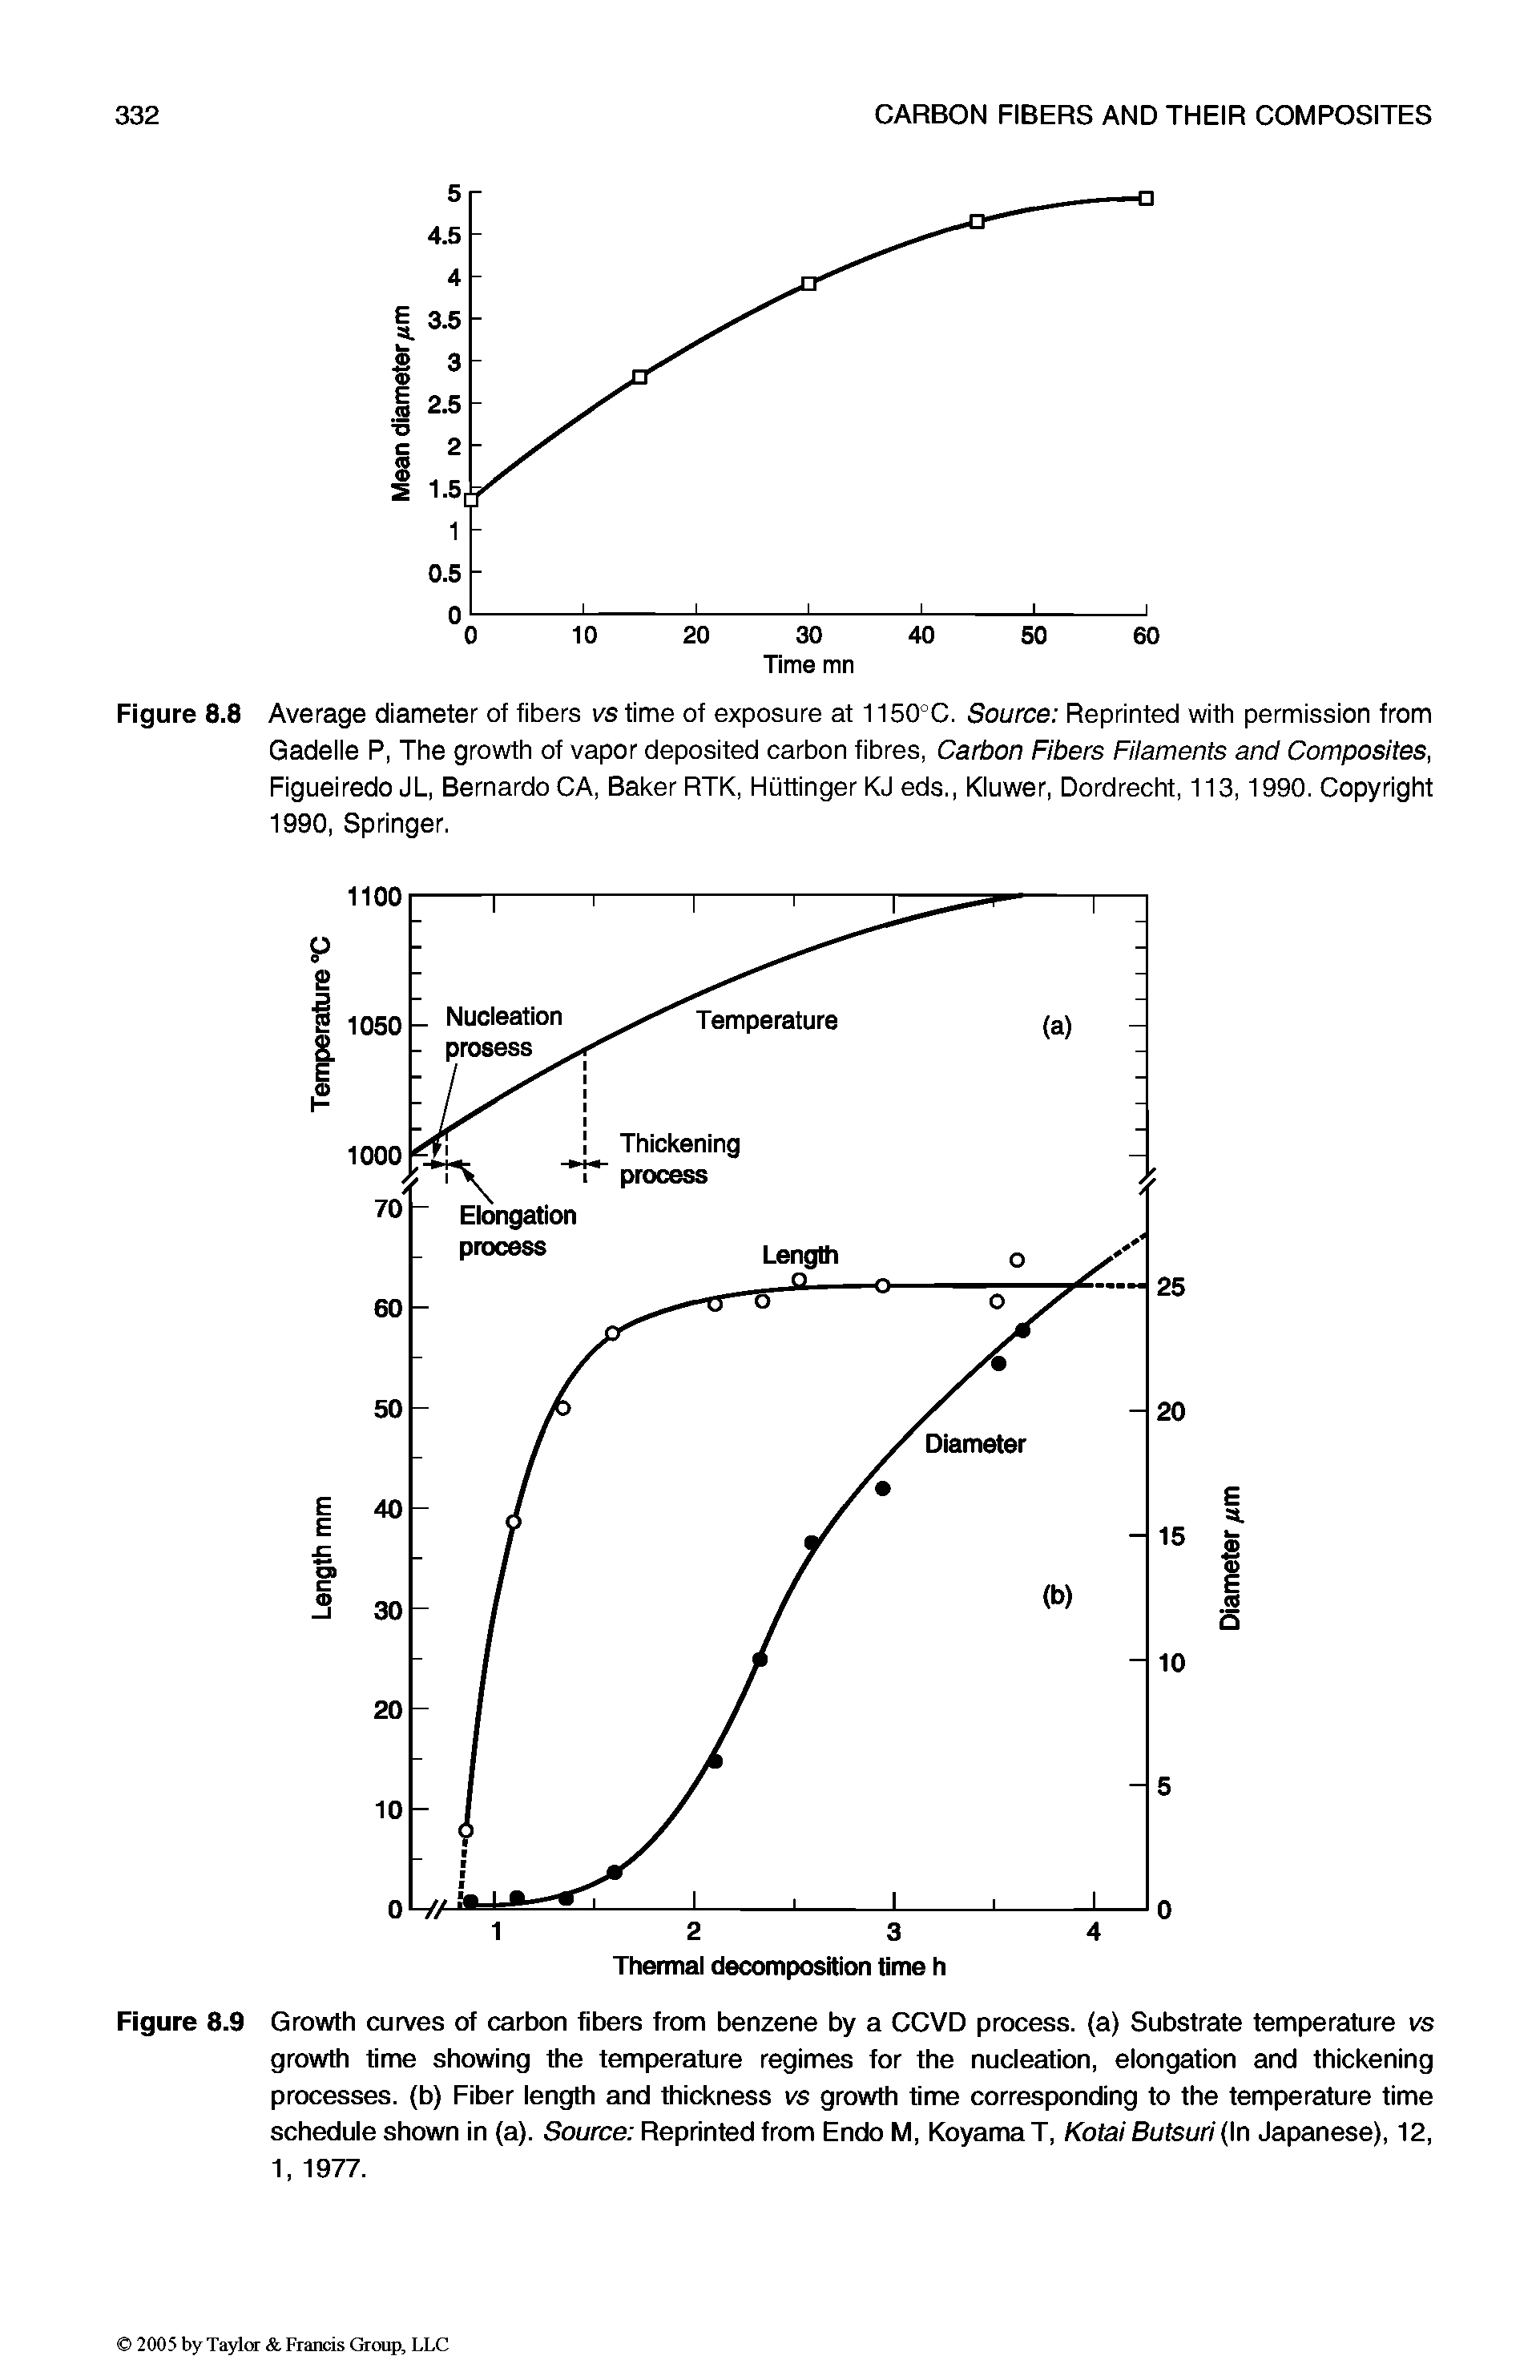 Figure 8.9 Growth curves of carbon fibers from benzene by a CCVD process, (a) Substrate temperature vs growth time showing the temperature regimes for the nucieation, elongation and thickening processes, (b) Fiber iength and thickness vs growth time corresponding to the temperature time schedule shown in (a). Source Reprinted from Endo M, Koyama T, Kotai Butsuri (In Japanese), 12, 1, 1977.